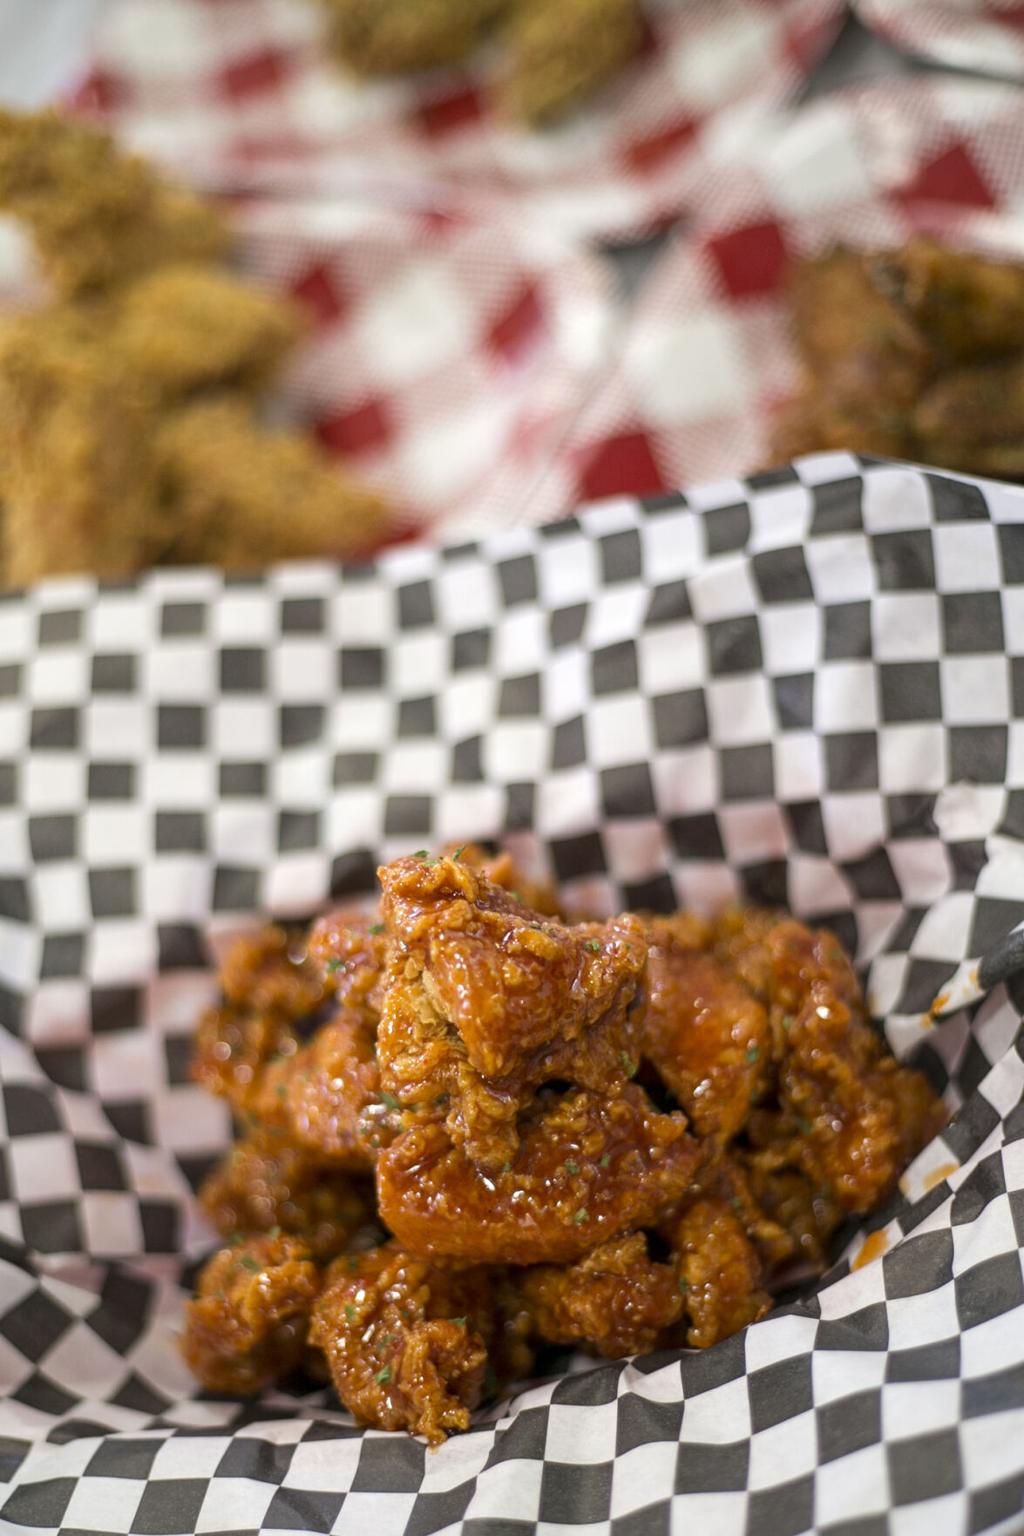 PETE TITTL: You'll go Crazy for these double-fried wings, Food